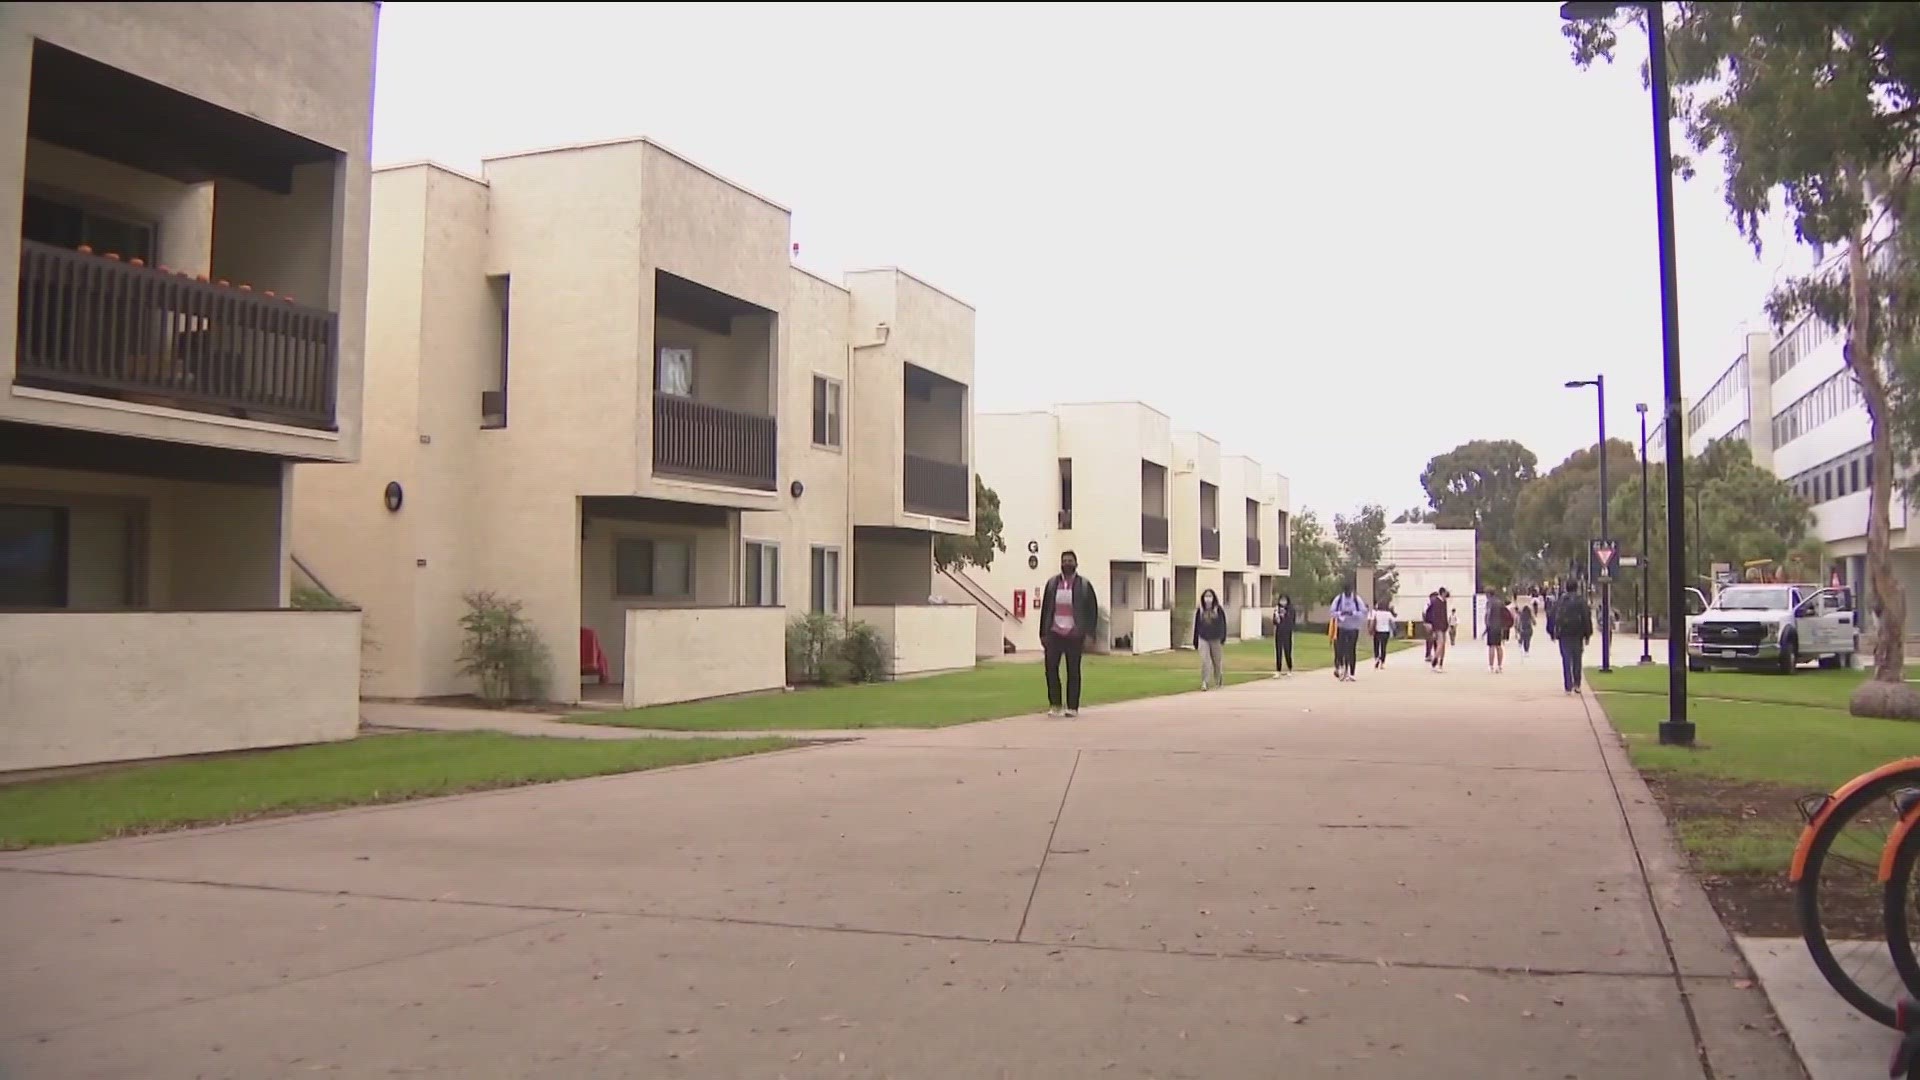 UC San Diego had 42,000 students last Fall. They’re likely to set a new record this Fall. Thousands of students won’t have a place to live on campus.